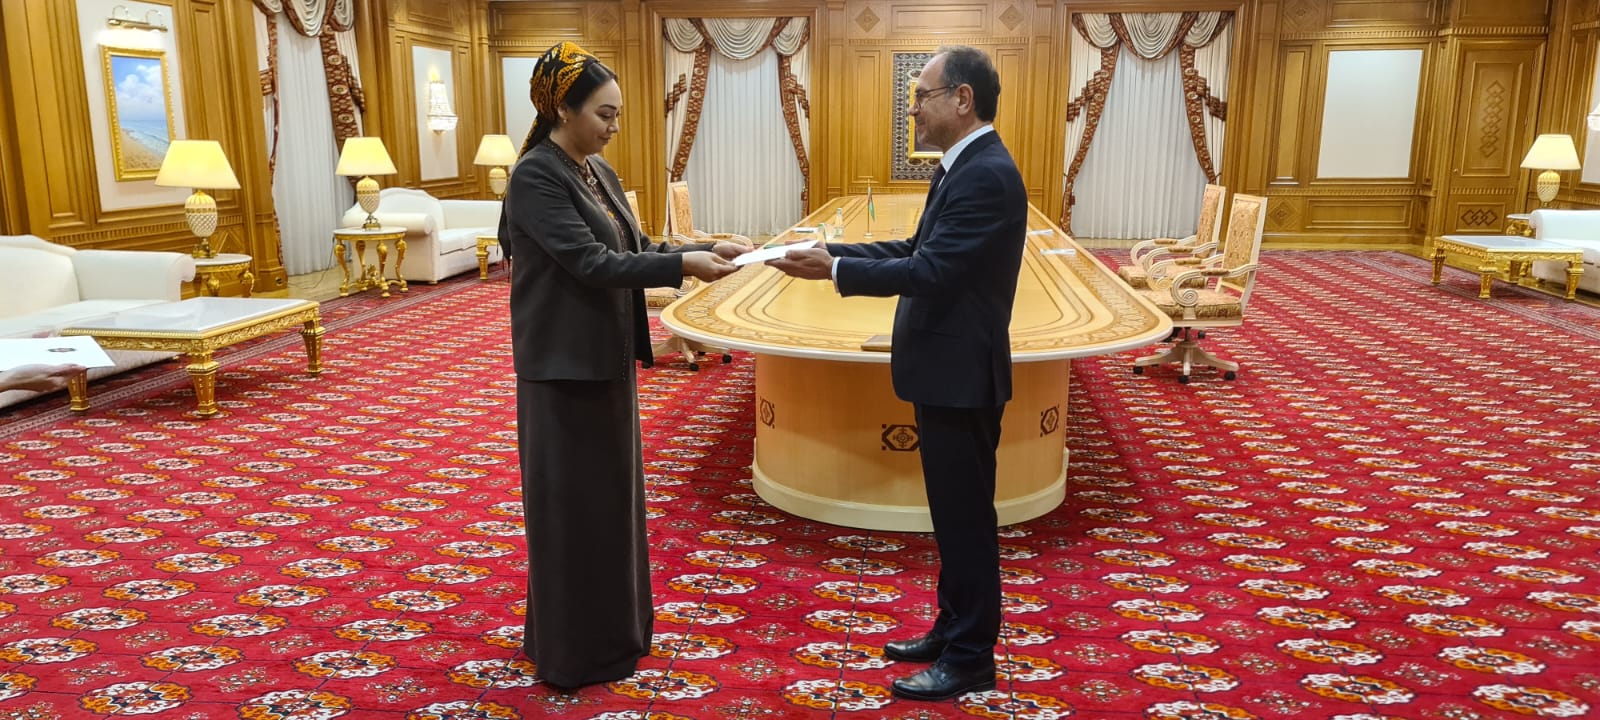 Ambassador Rouslan Stoyanov presented his credentials to the Speaker of the Mejlis of Turkmenistan